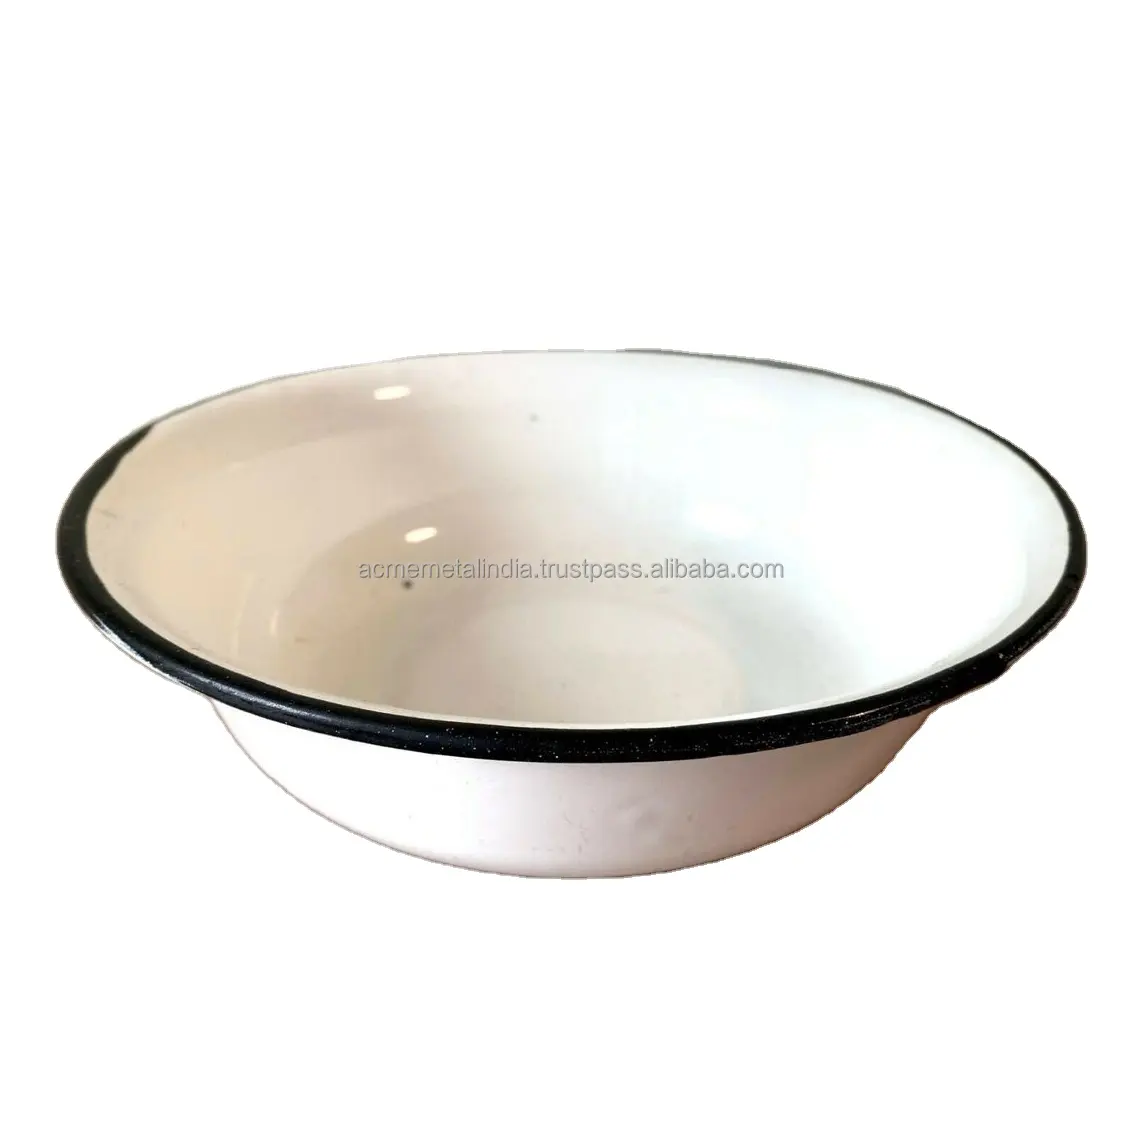 Serving Bowls Classic Luxury Simple Design Enamel Metal Serving Bowl White Powder Coated With Black Border Kitchen Table Decors